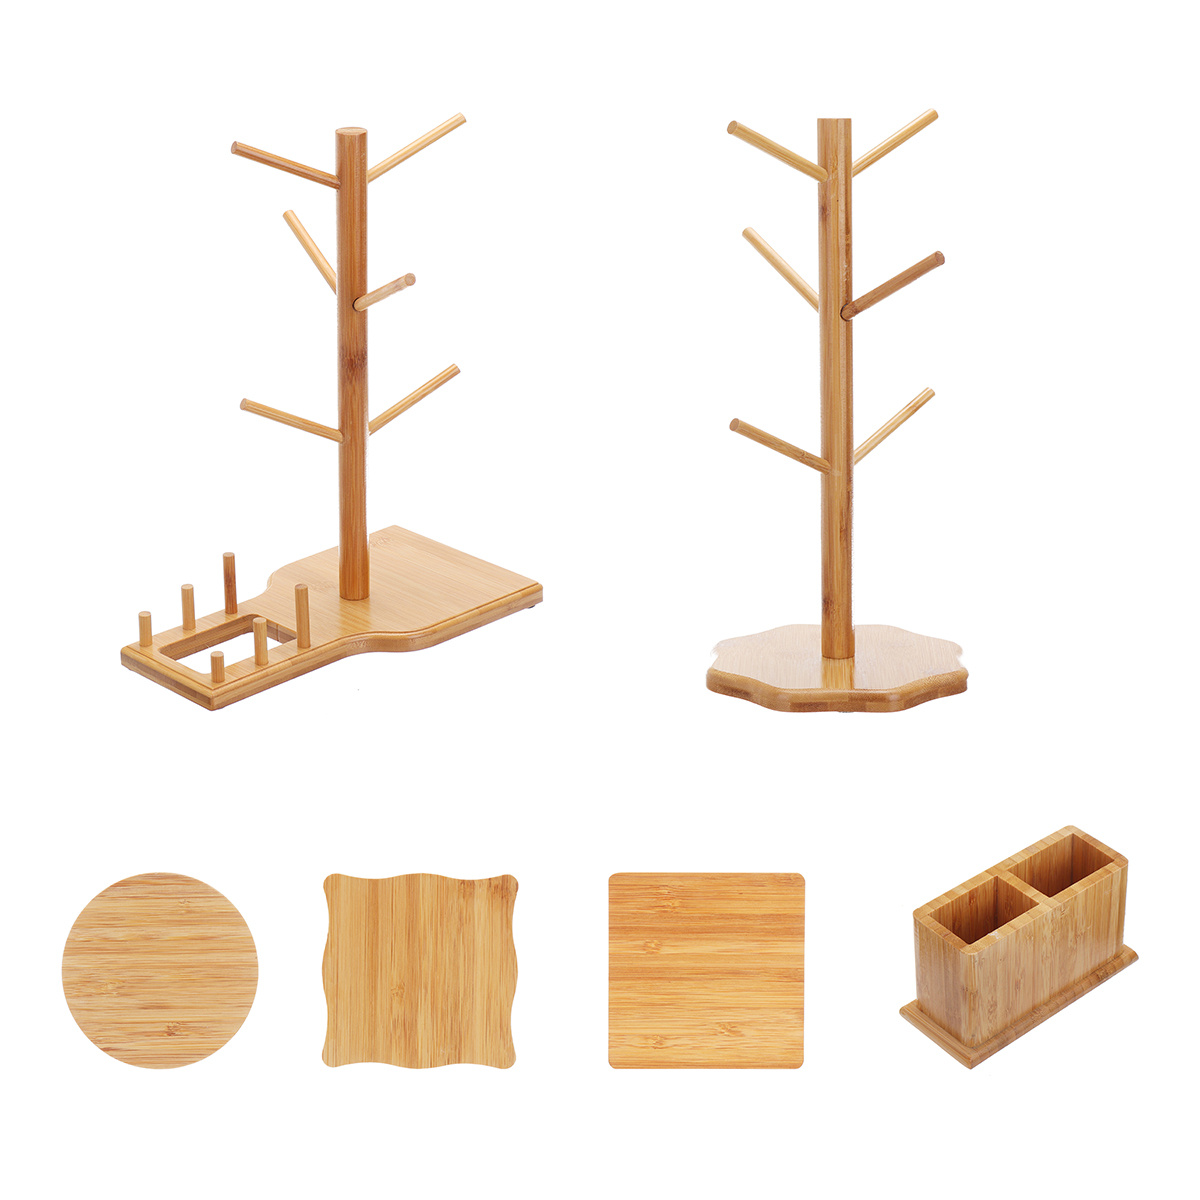 Bamboo-Cup-Mat-Water-Cup-Storage-Rack-Creative-Cup-Organizing-Shelf-Household-Office-Living-Wooden-G-1756070-14